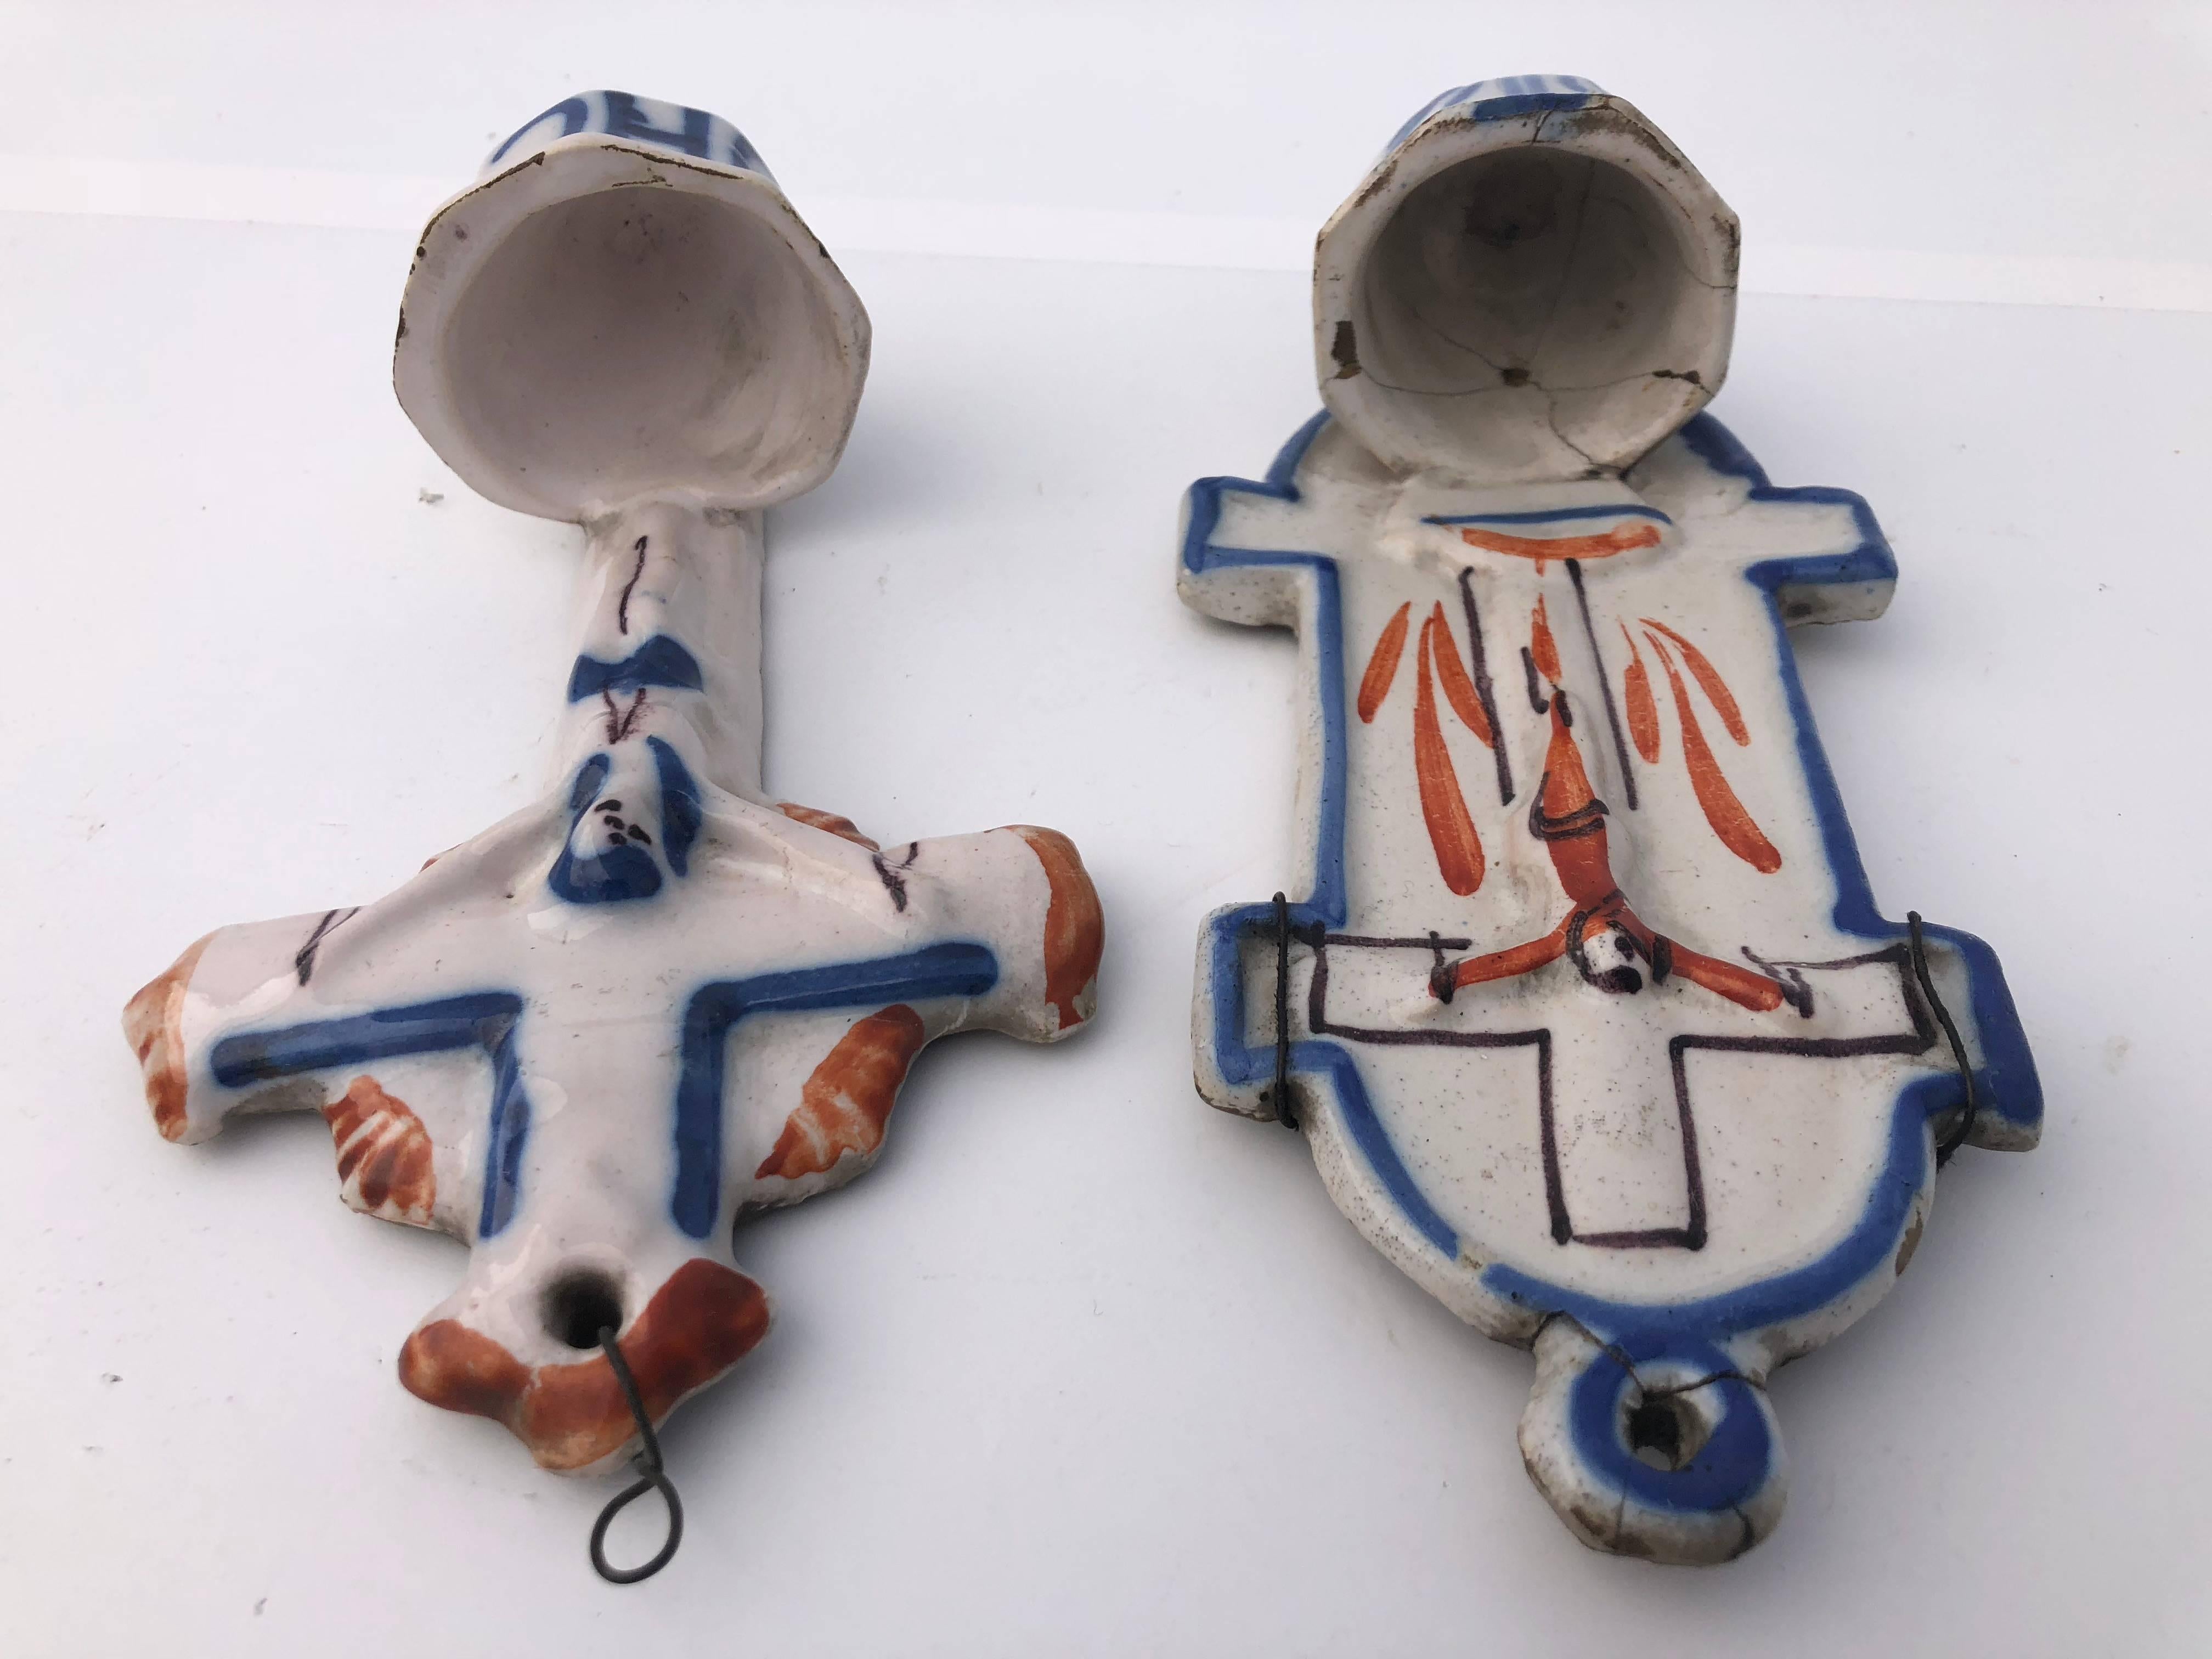 These are two incredible French Faience holy water fonts from the 1700s. Both have a crucifix and are hand painted with blue and orange touches. They are works of art and would be incredible on any wall.

 